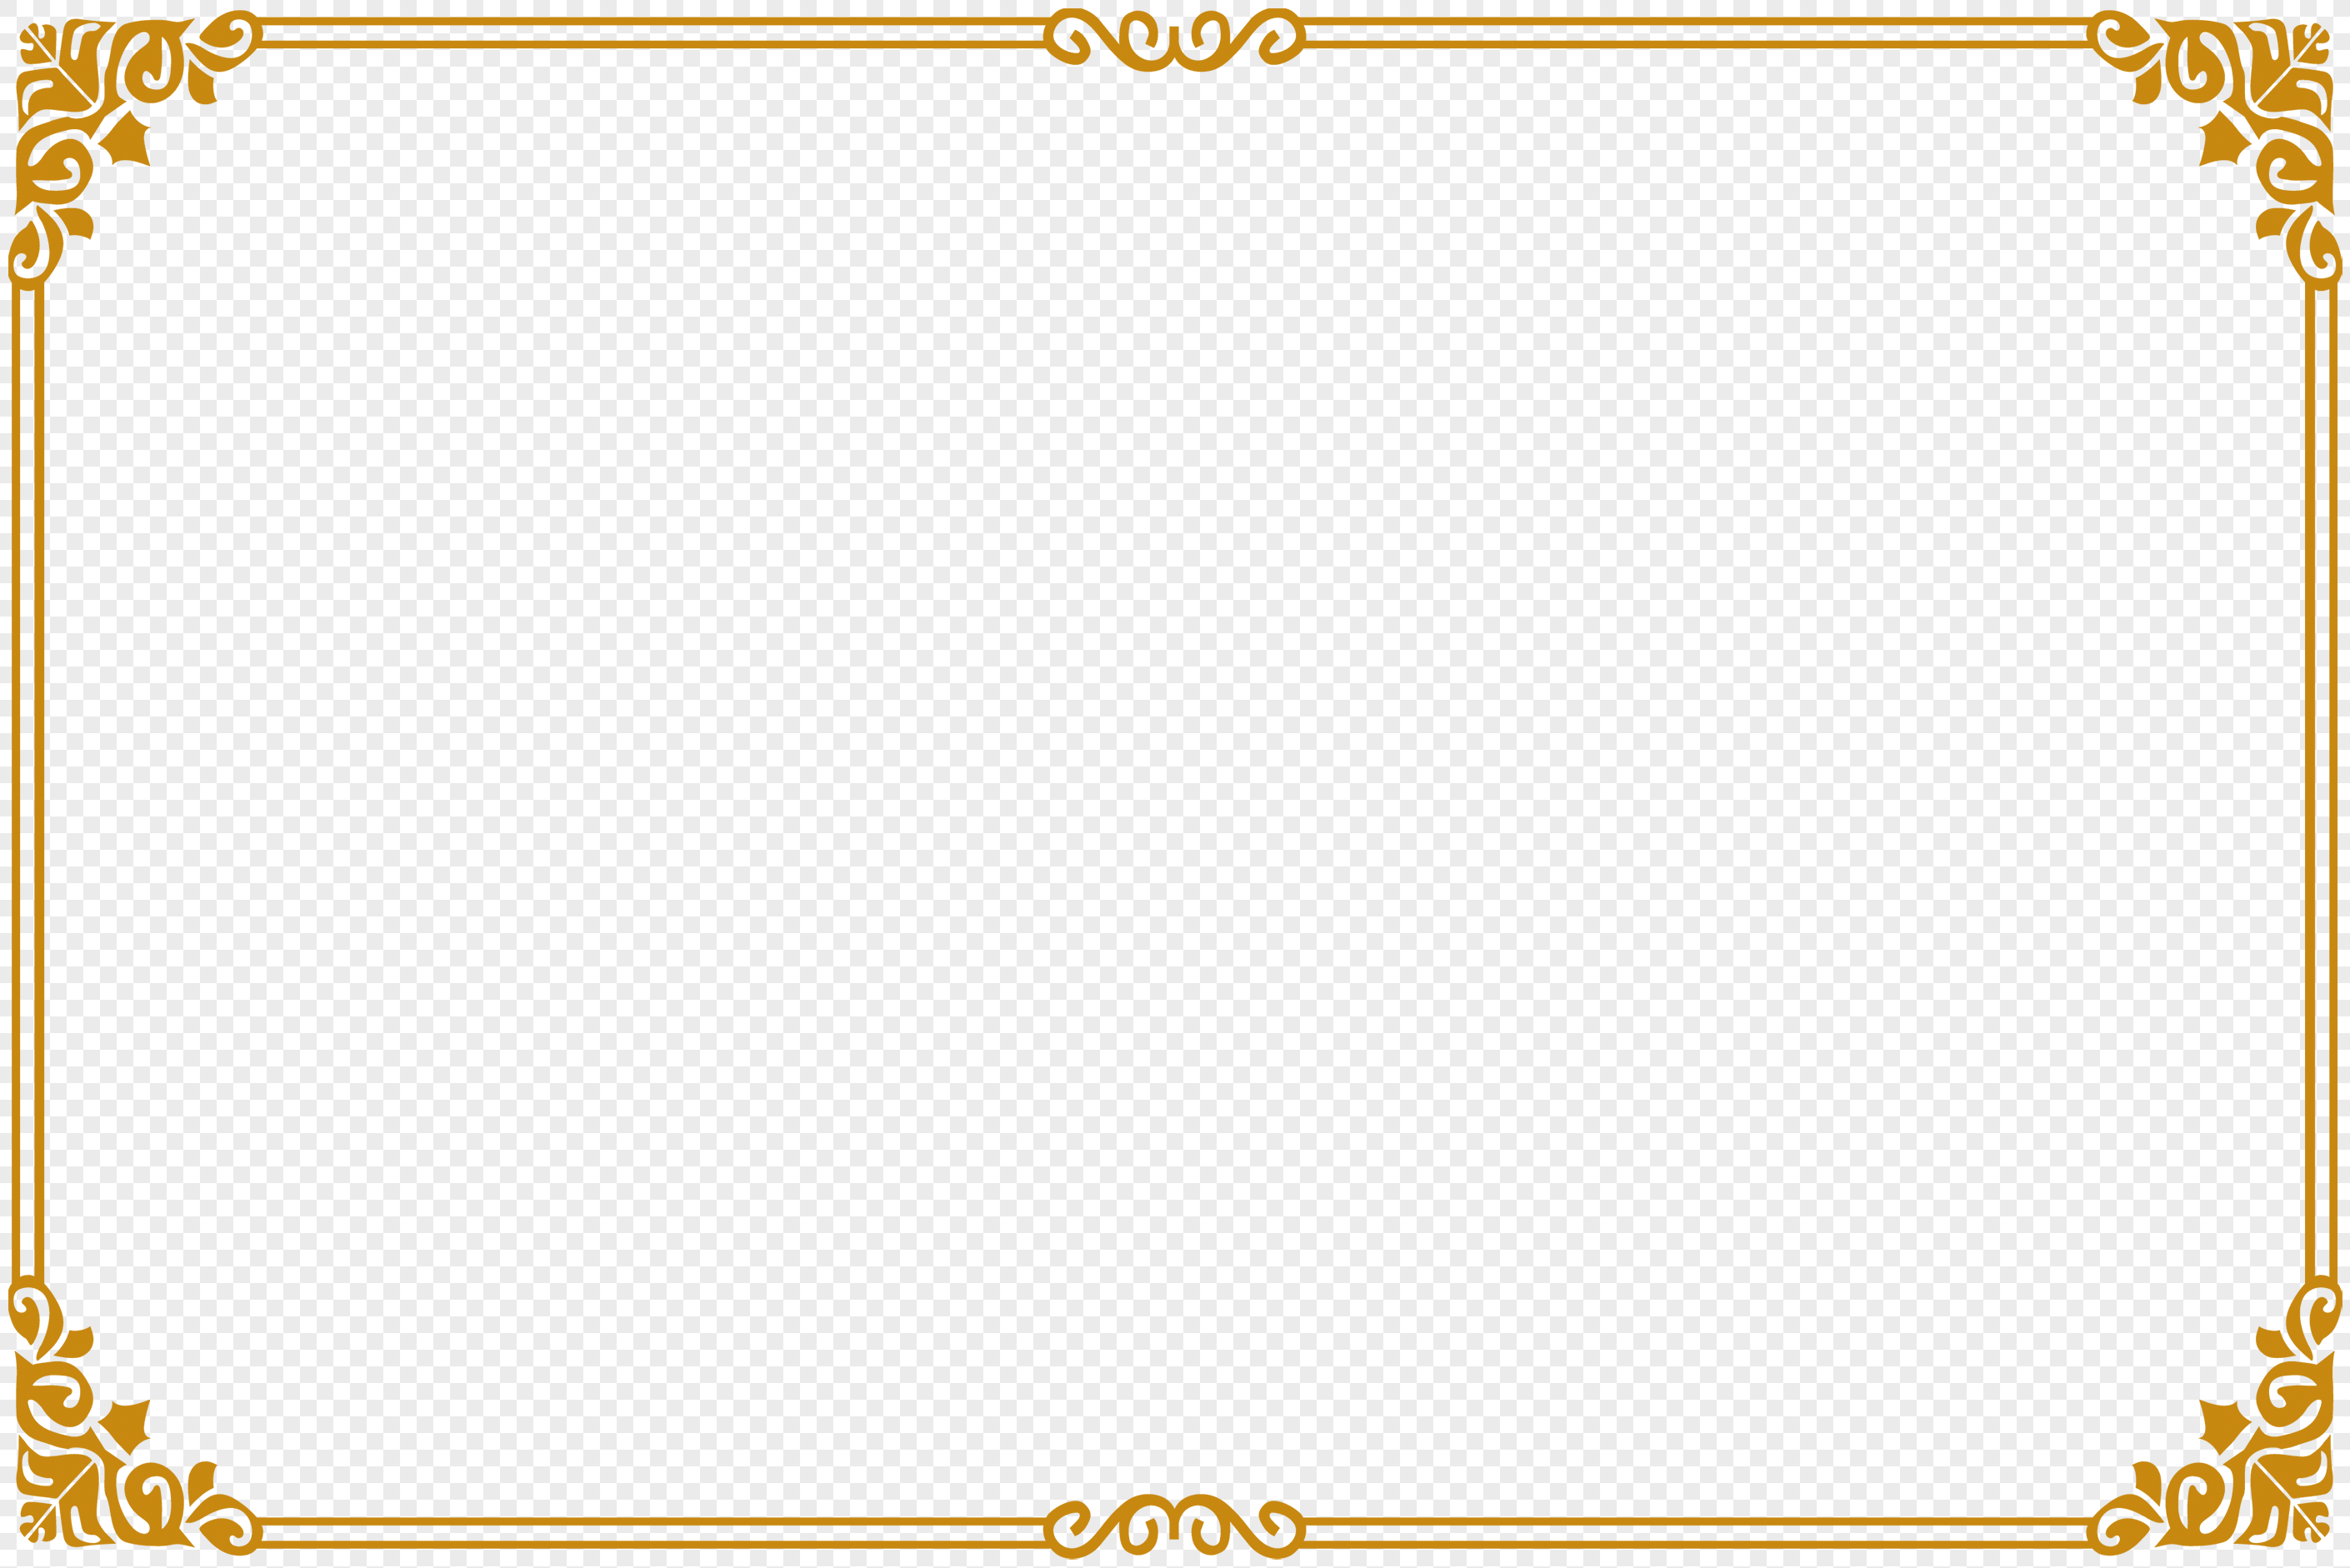 Chinese pattern border png image_picture free download 400753418